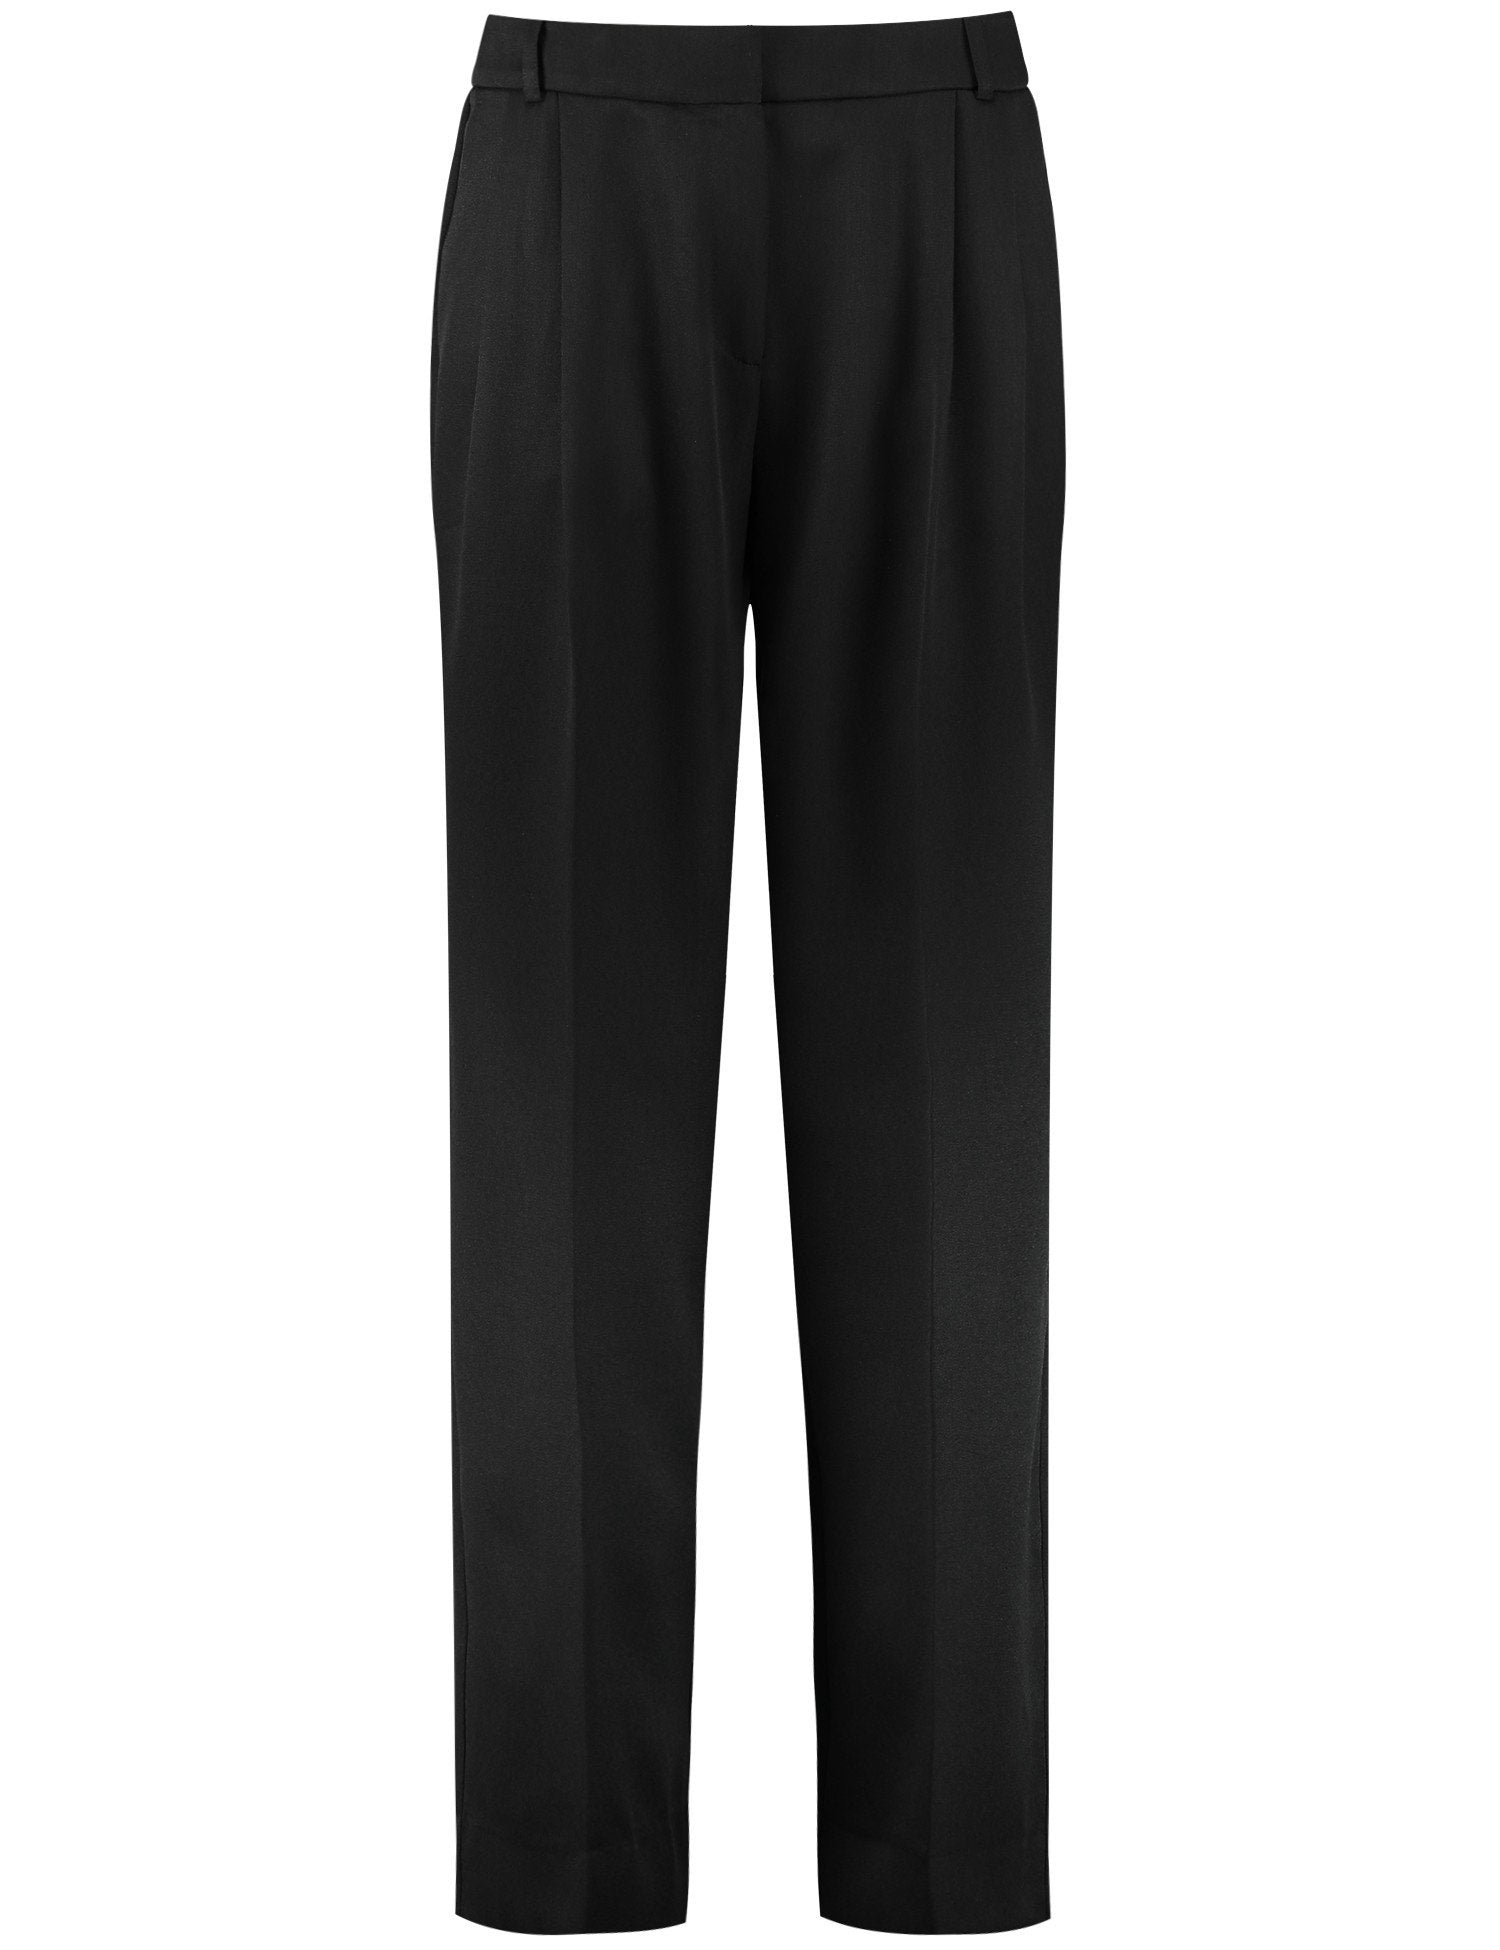 Trousers With A Wide Leg_420412-11253_1100_02